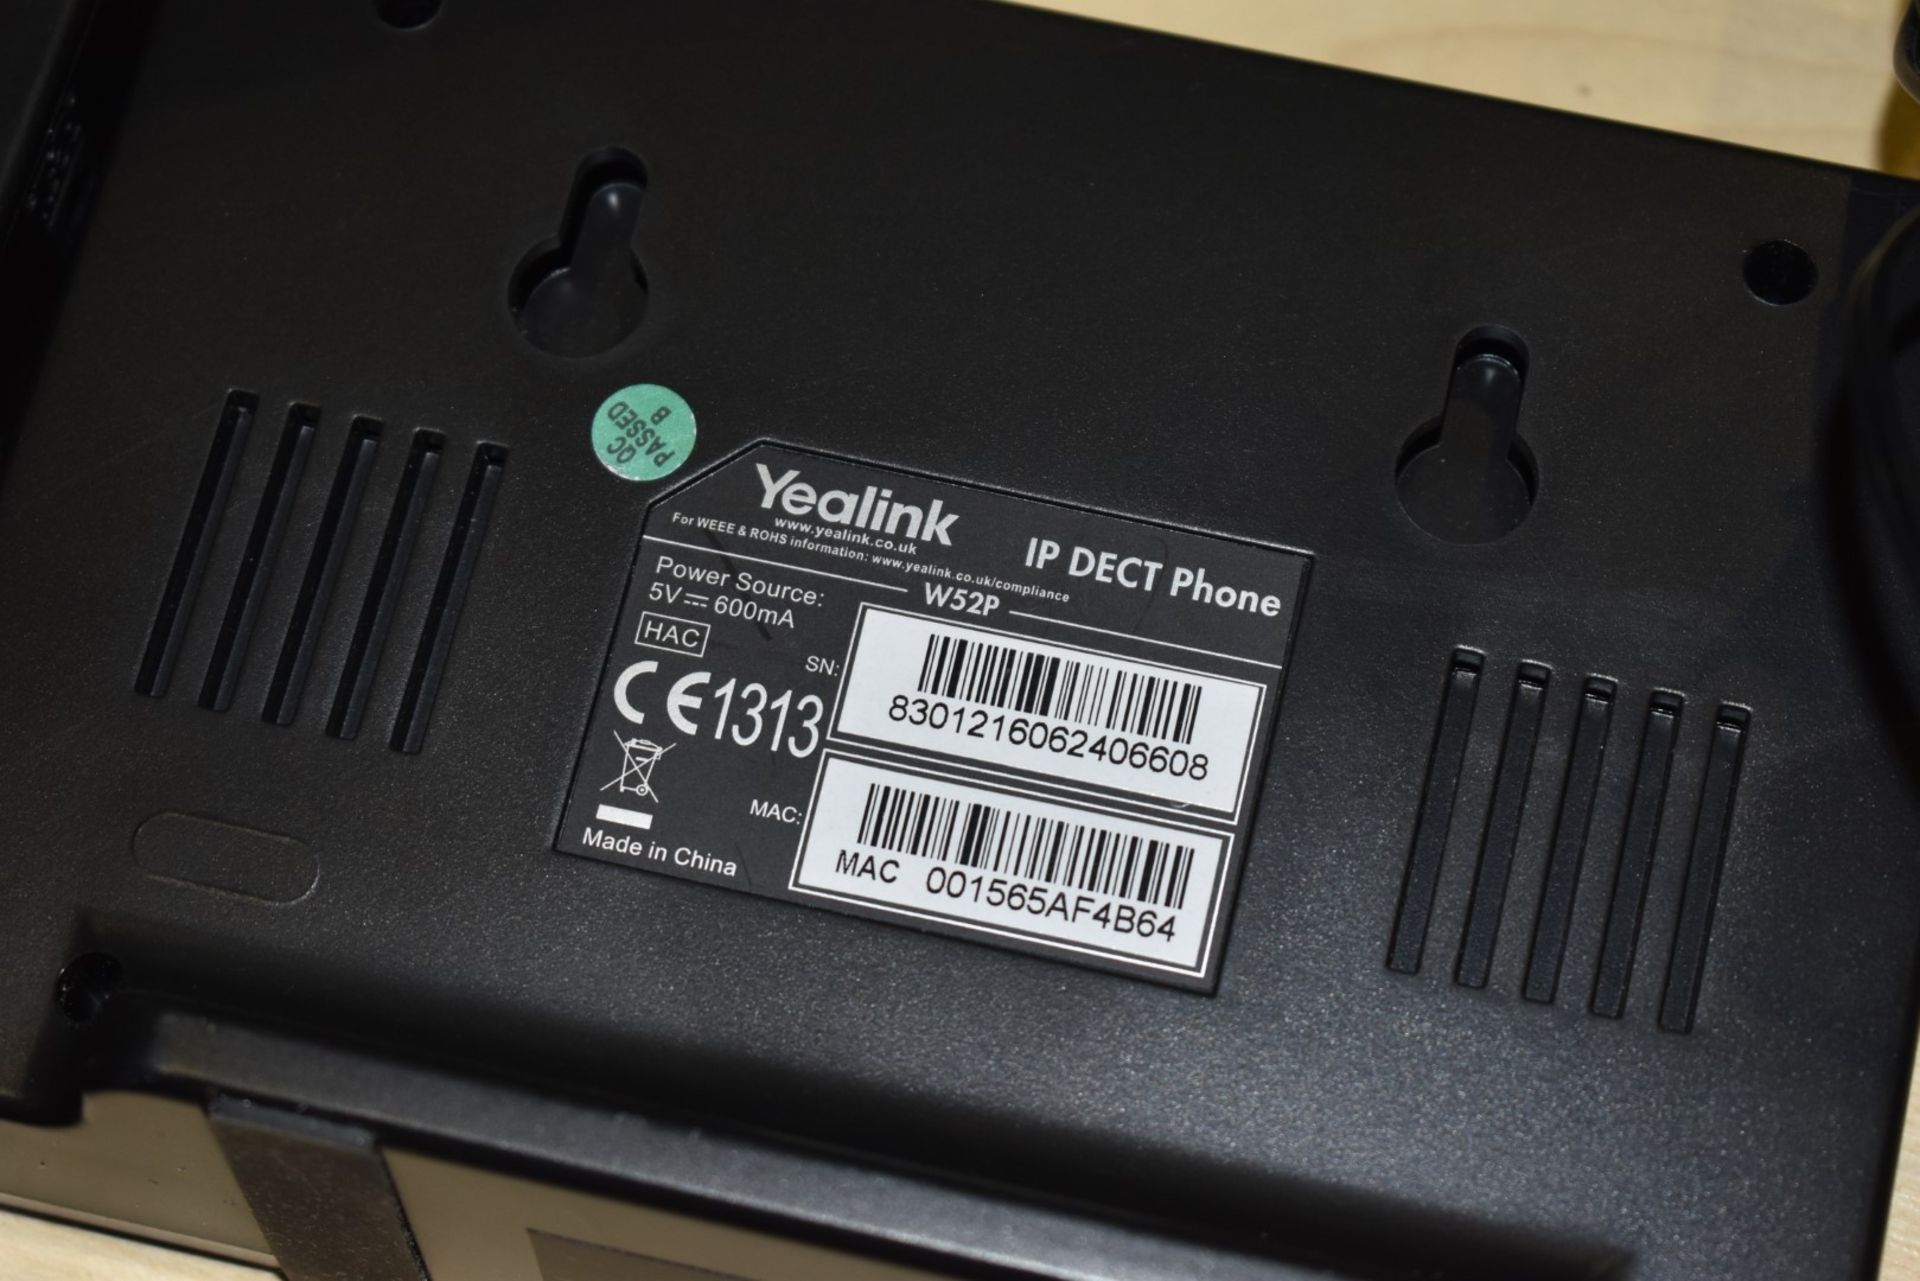 3 x Yealink IP Dect Phone Model W52P - Includes One PSU Only - Ref: In2124 wh1 pal1 - CL011 - - Image 6 of 7